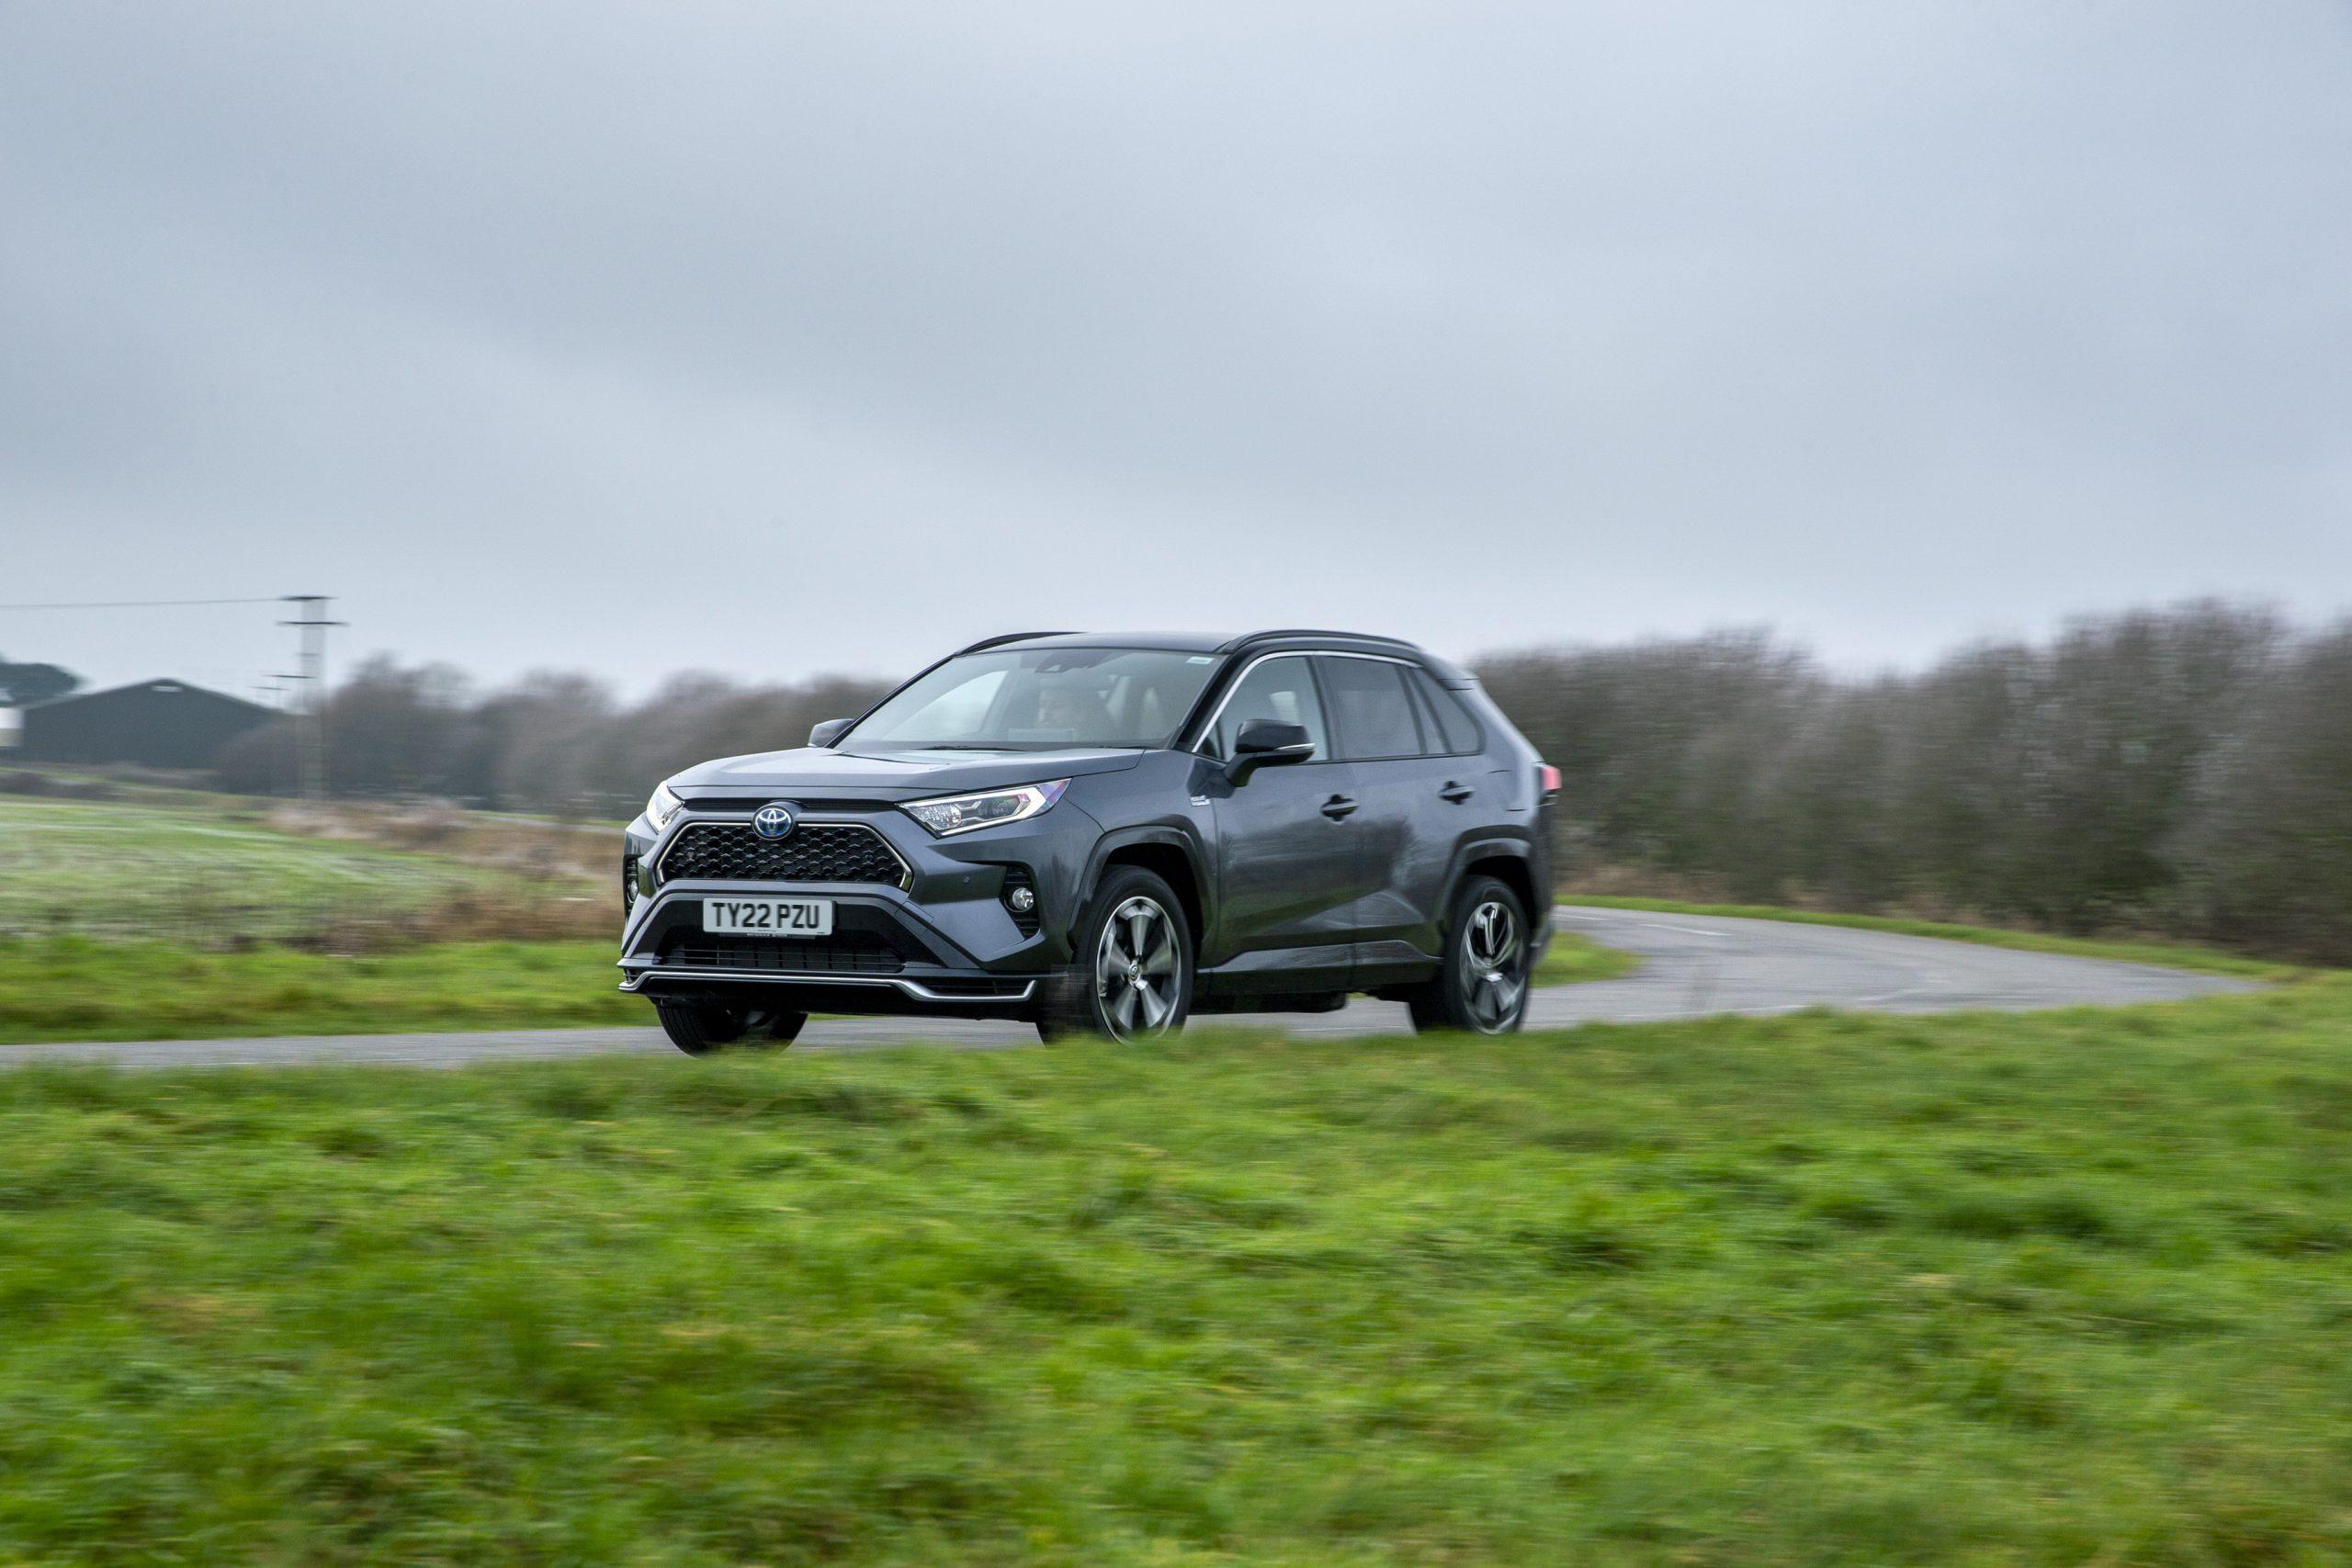 a grey Toyota RAV4 PHEV driving on a country road in the UK